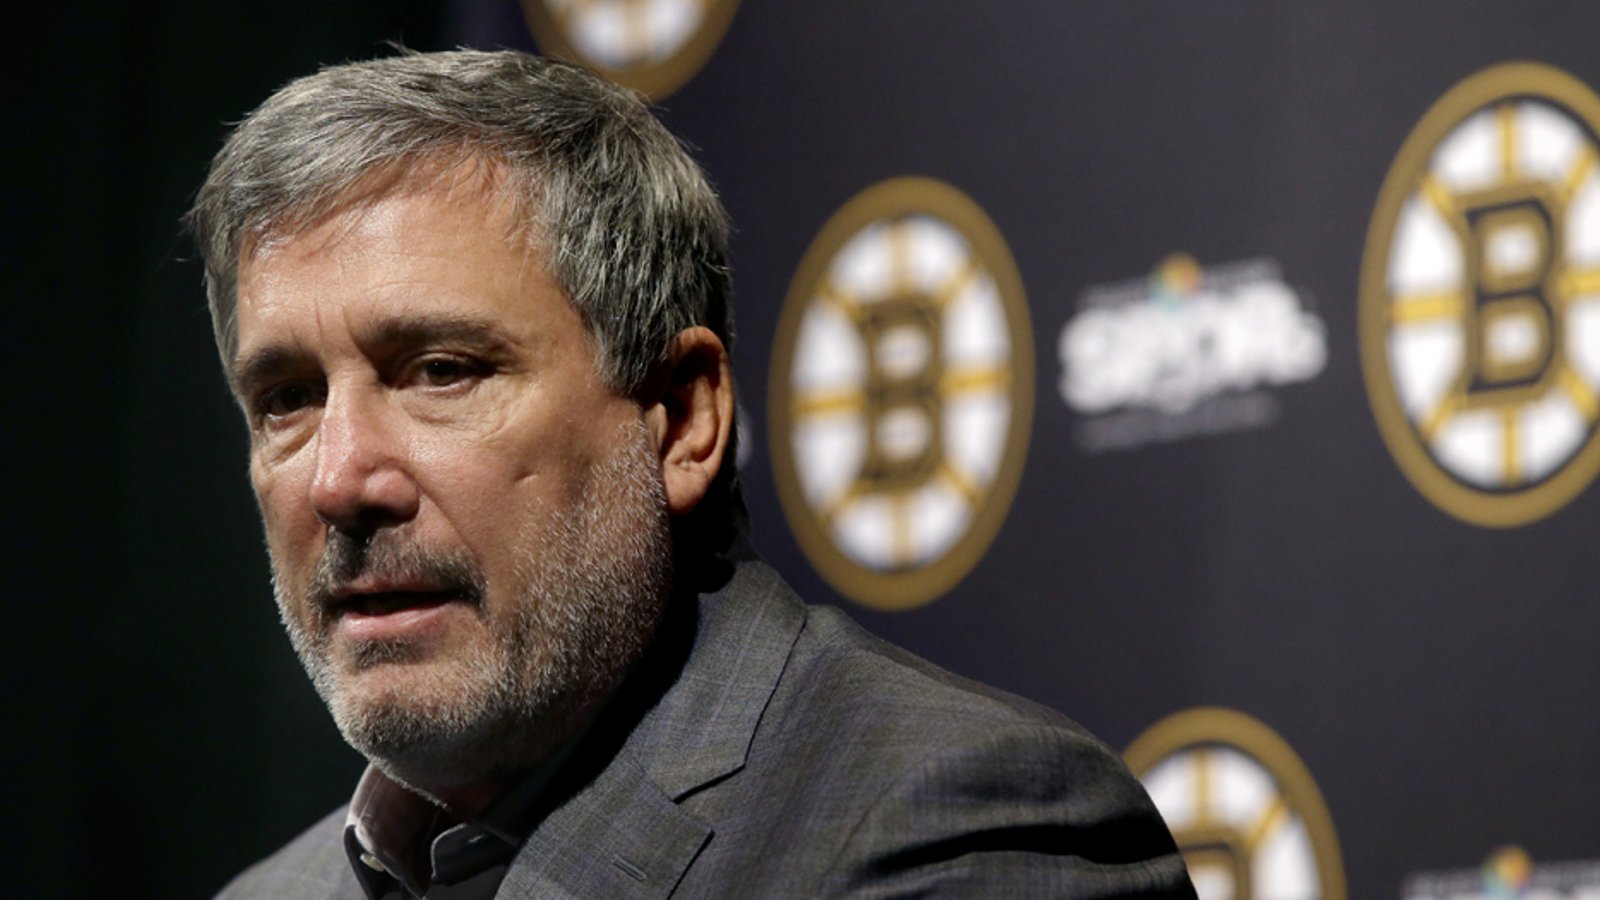 Neely talks about opening facilities in Boston, starting Bruins’ training camp